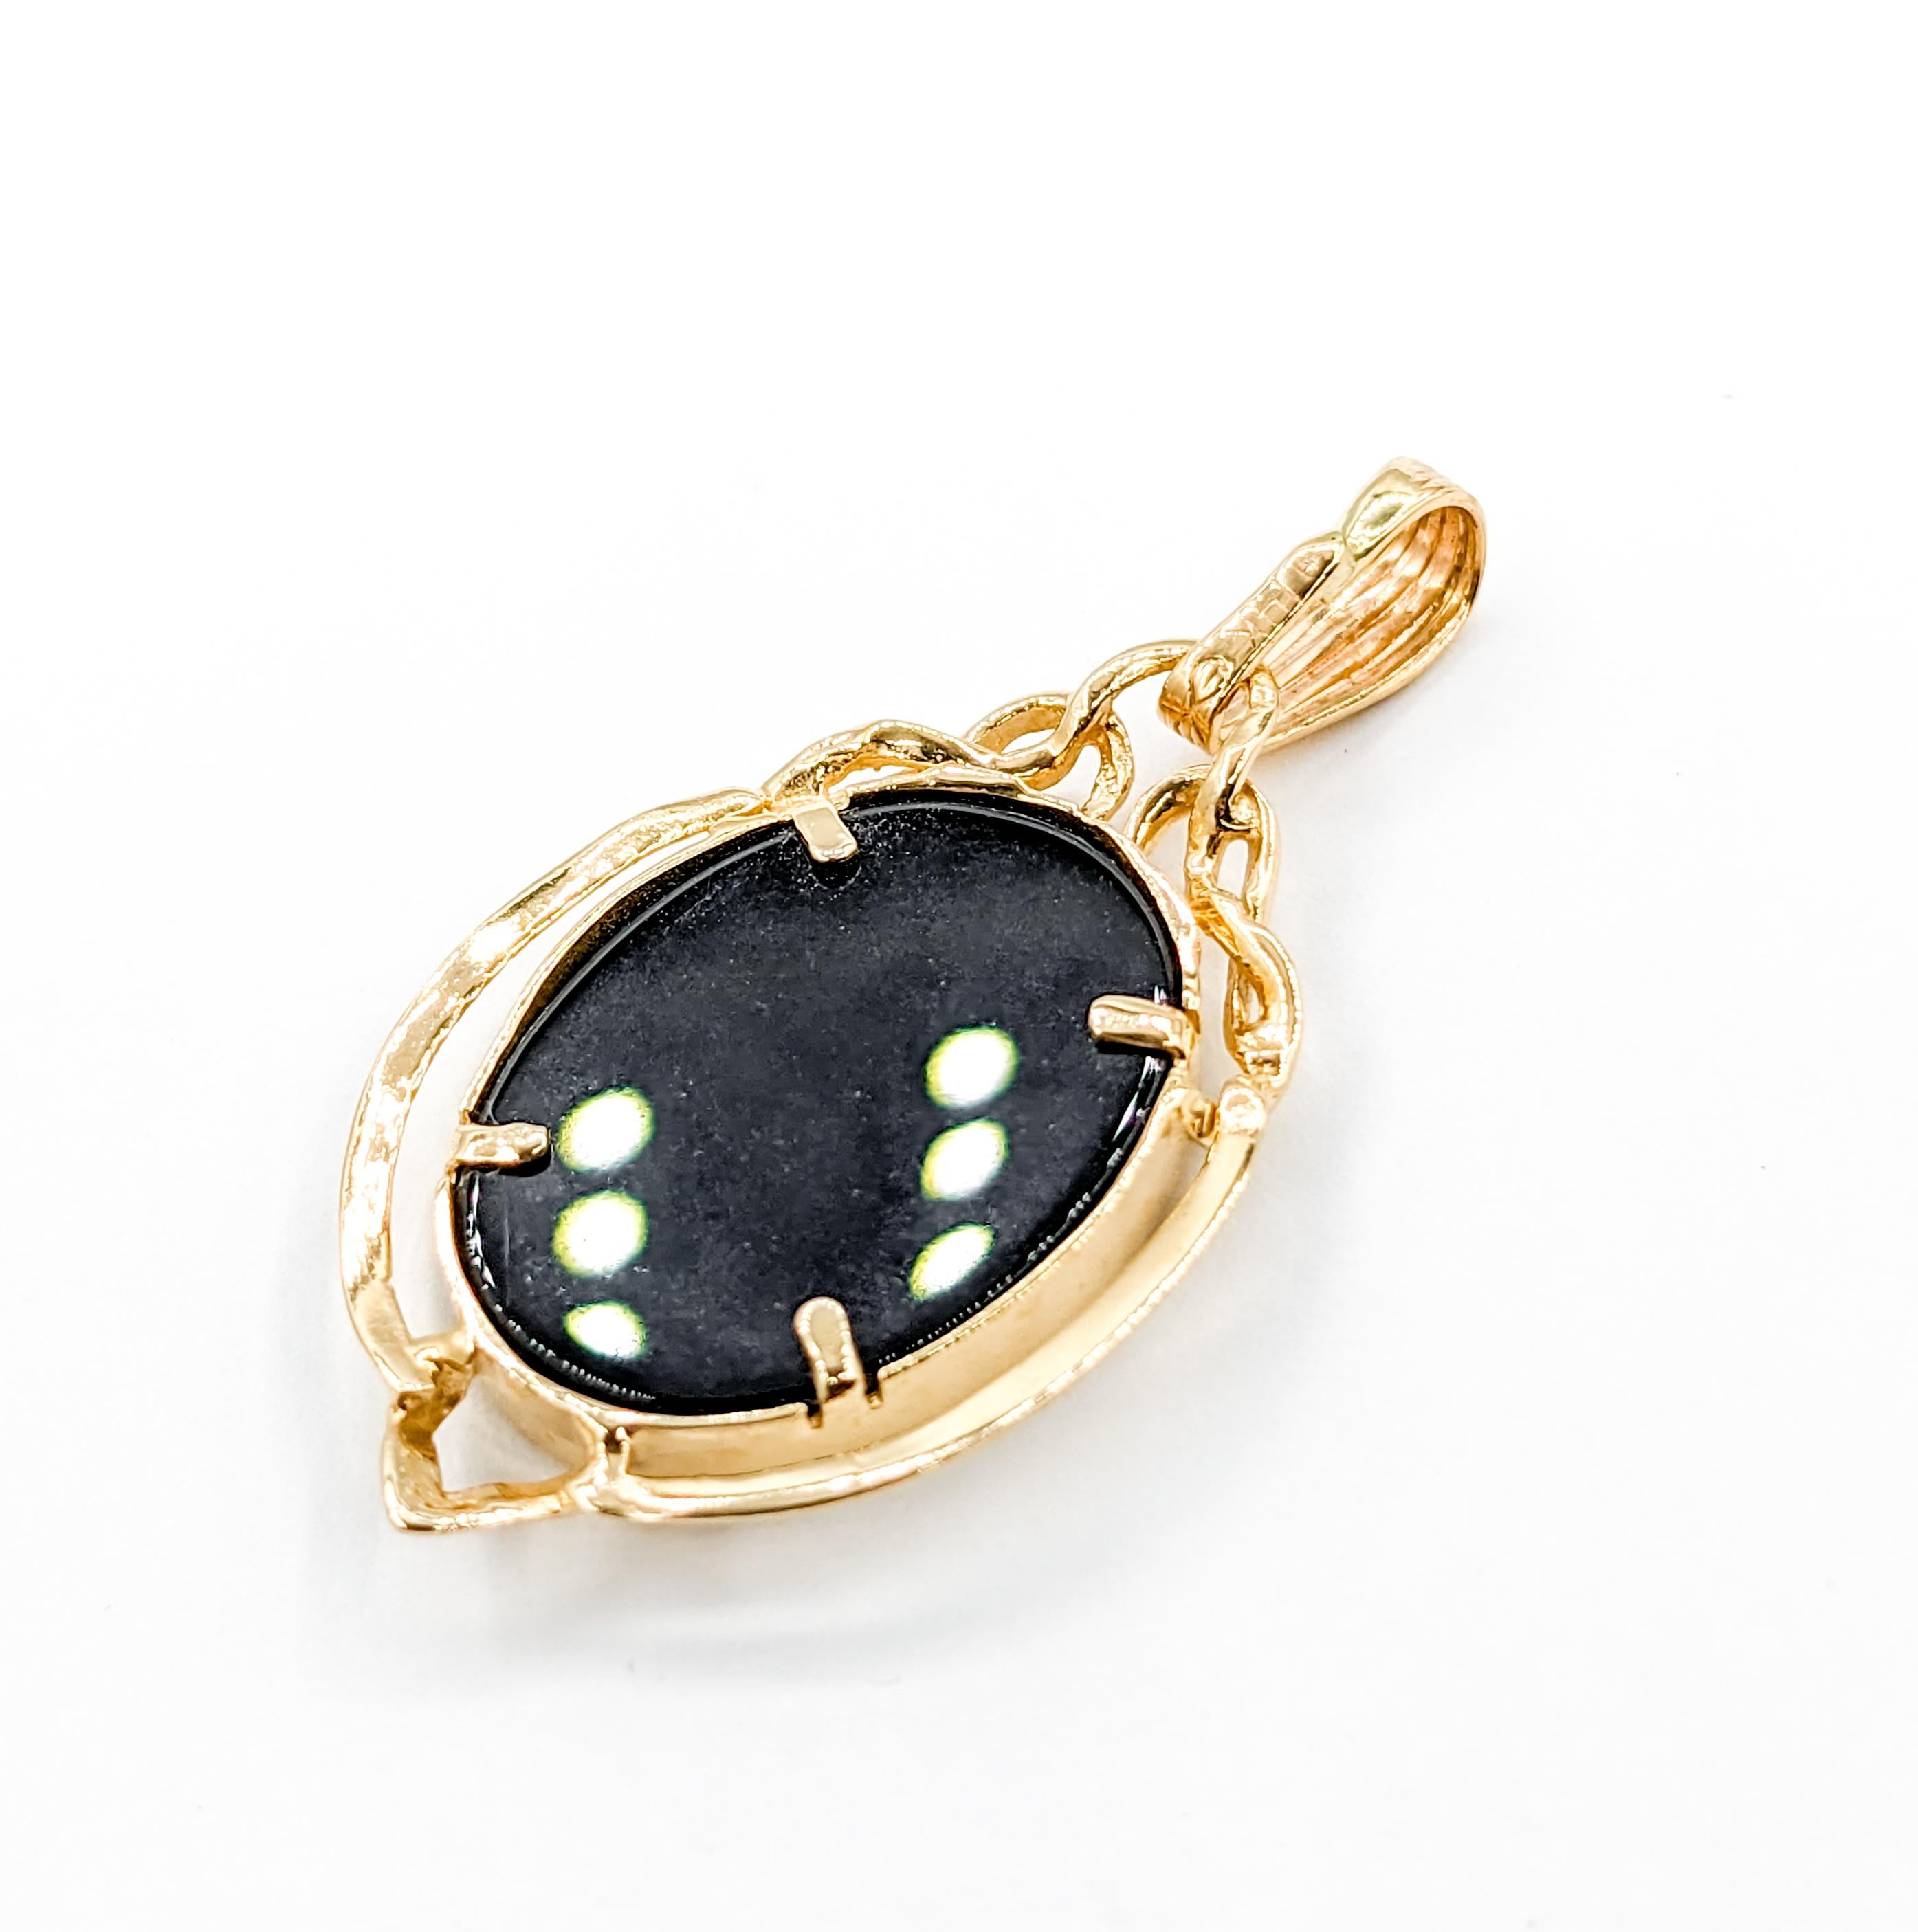 Carved Onyx Cameo Pendant Yellow Gold

Step into a world of timeless beauty with the exquisite Carved Cameo Pendant. This pendant is set in radiant 14k yellow gold and boasts a meticulously carved 21x15.5mm onyx gemstone cameo. This pendant features